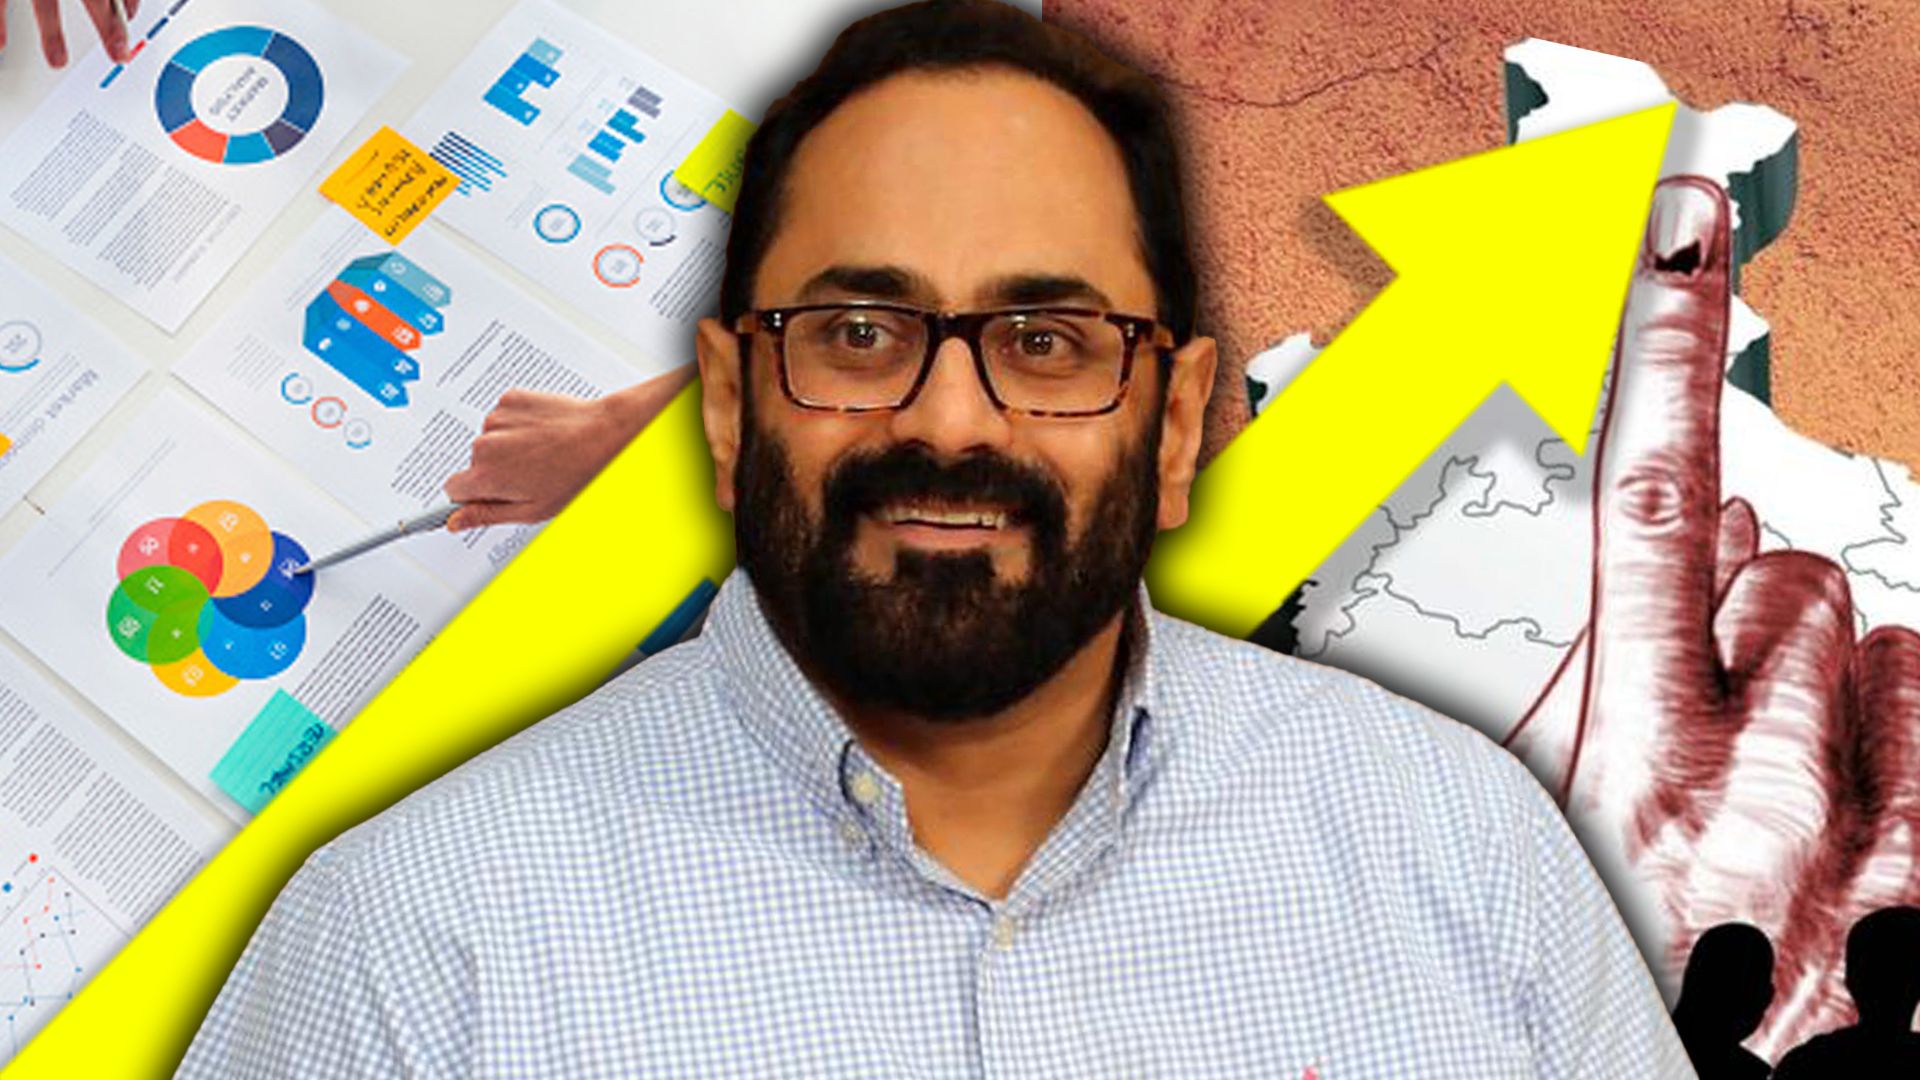 Fuelling Digital India: A sneak-peek into Rajeev Chandrasekhar’s mission to build an inclusive internet